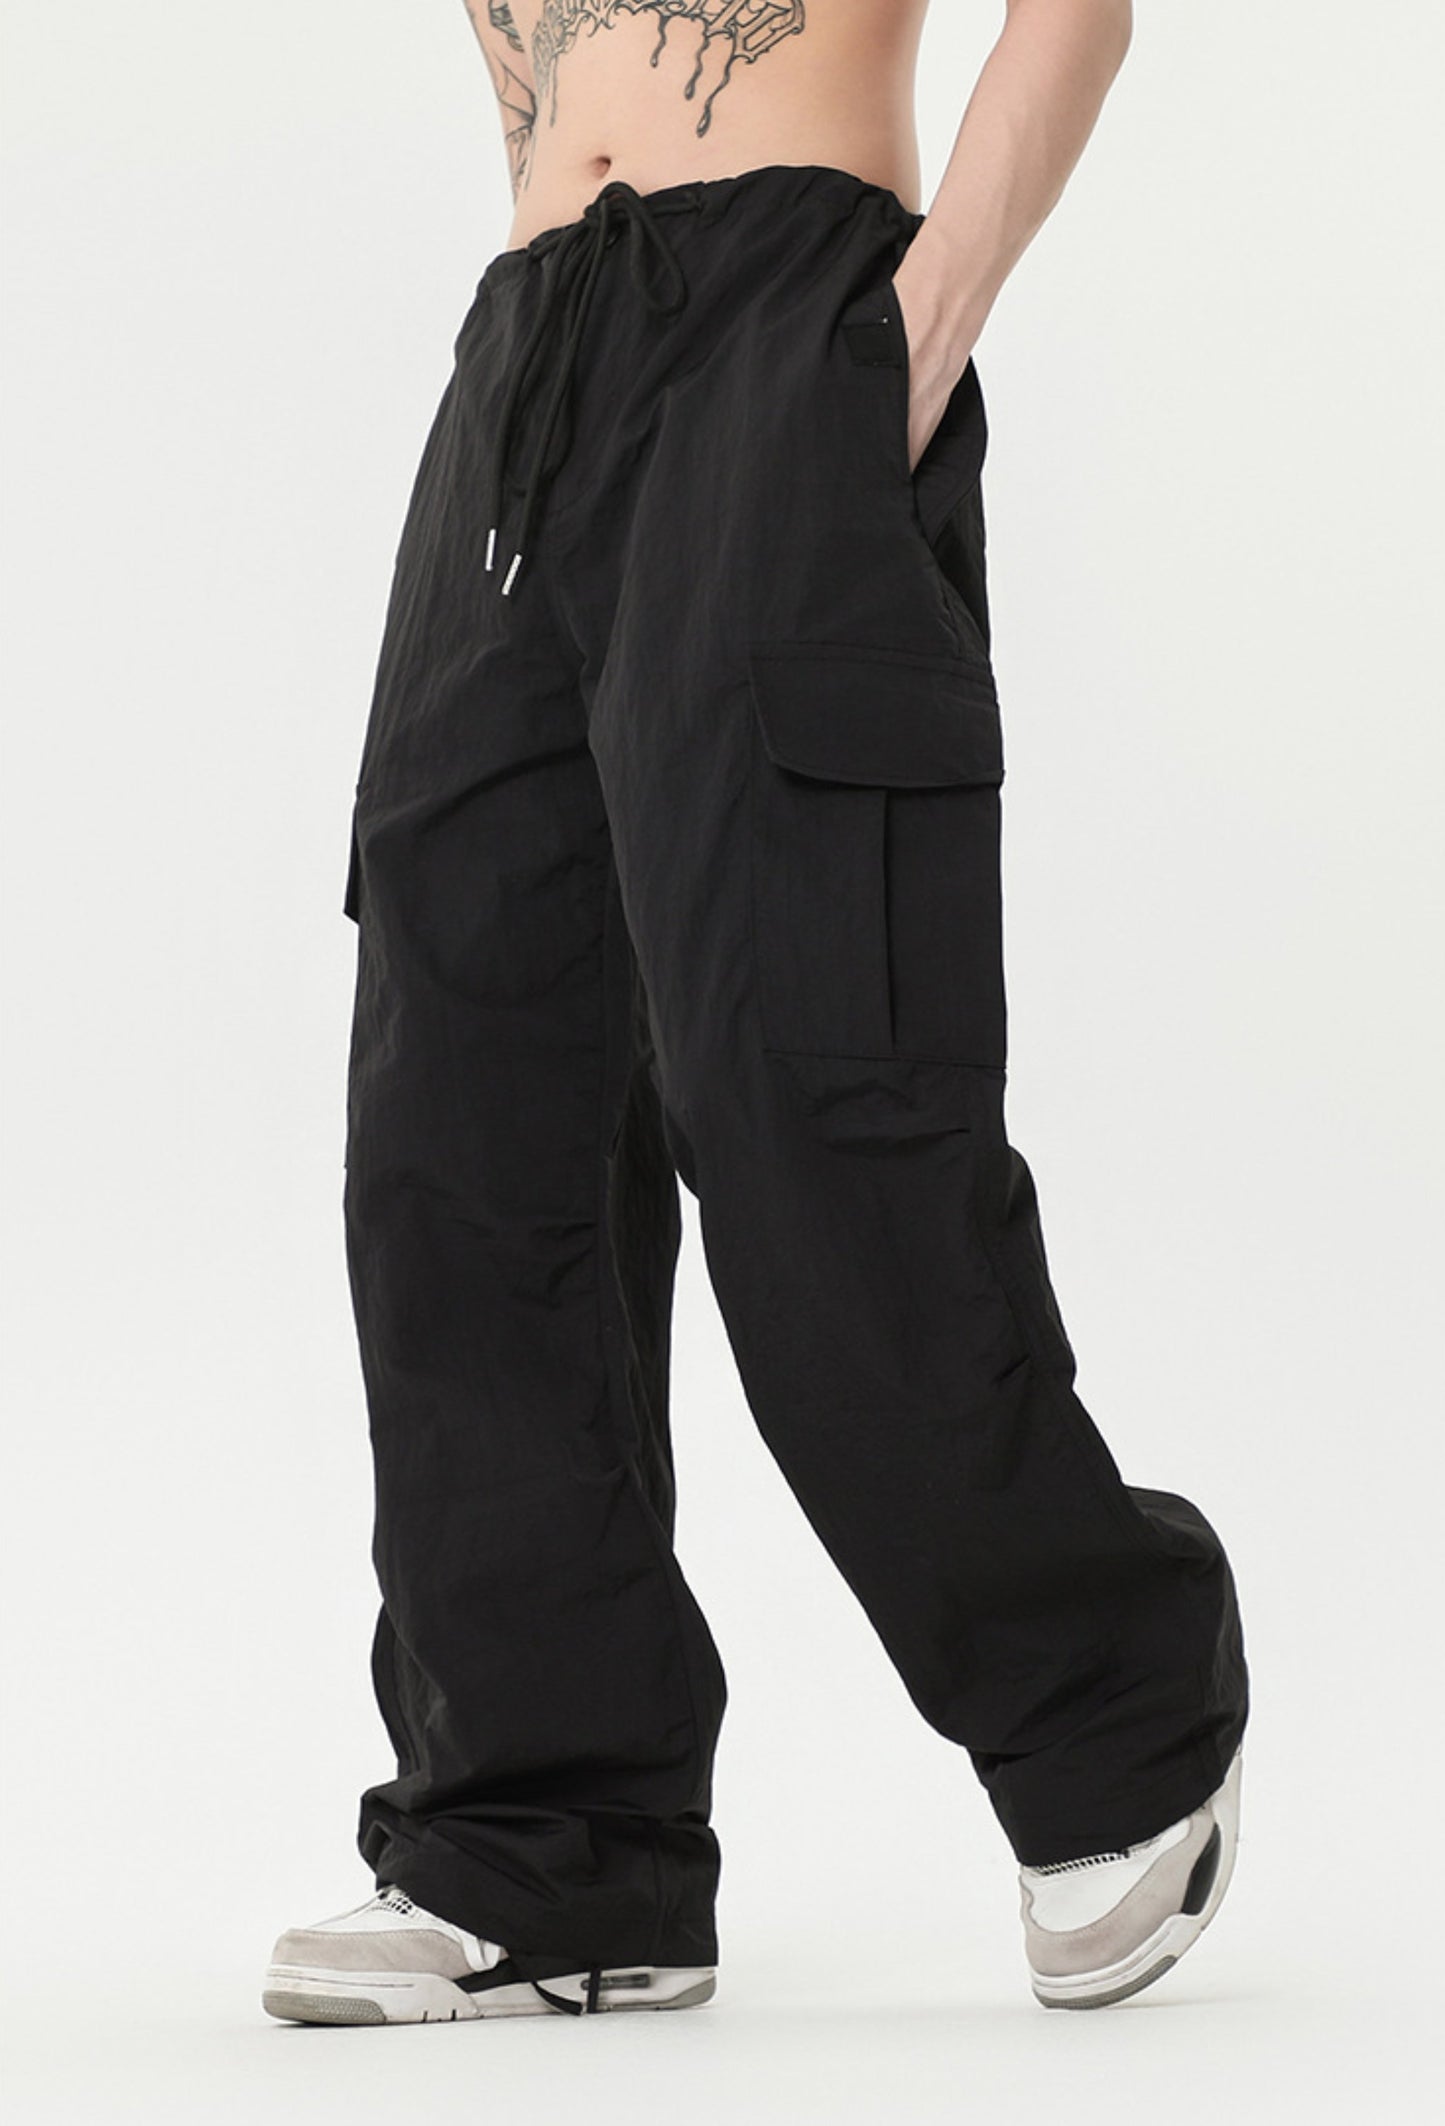 Unisex 2 Colors Black and Gray Pleated Loose Straight-leg Cargo Pants